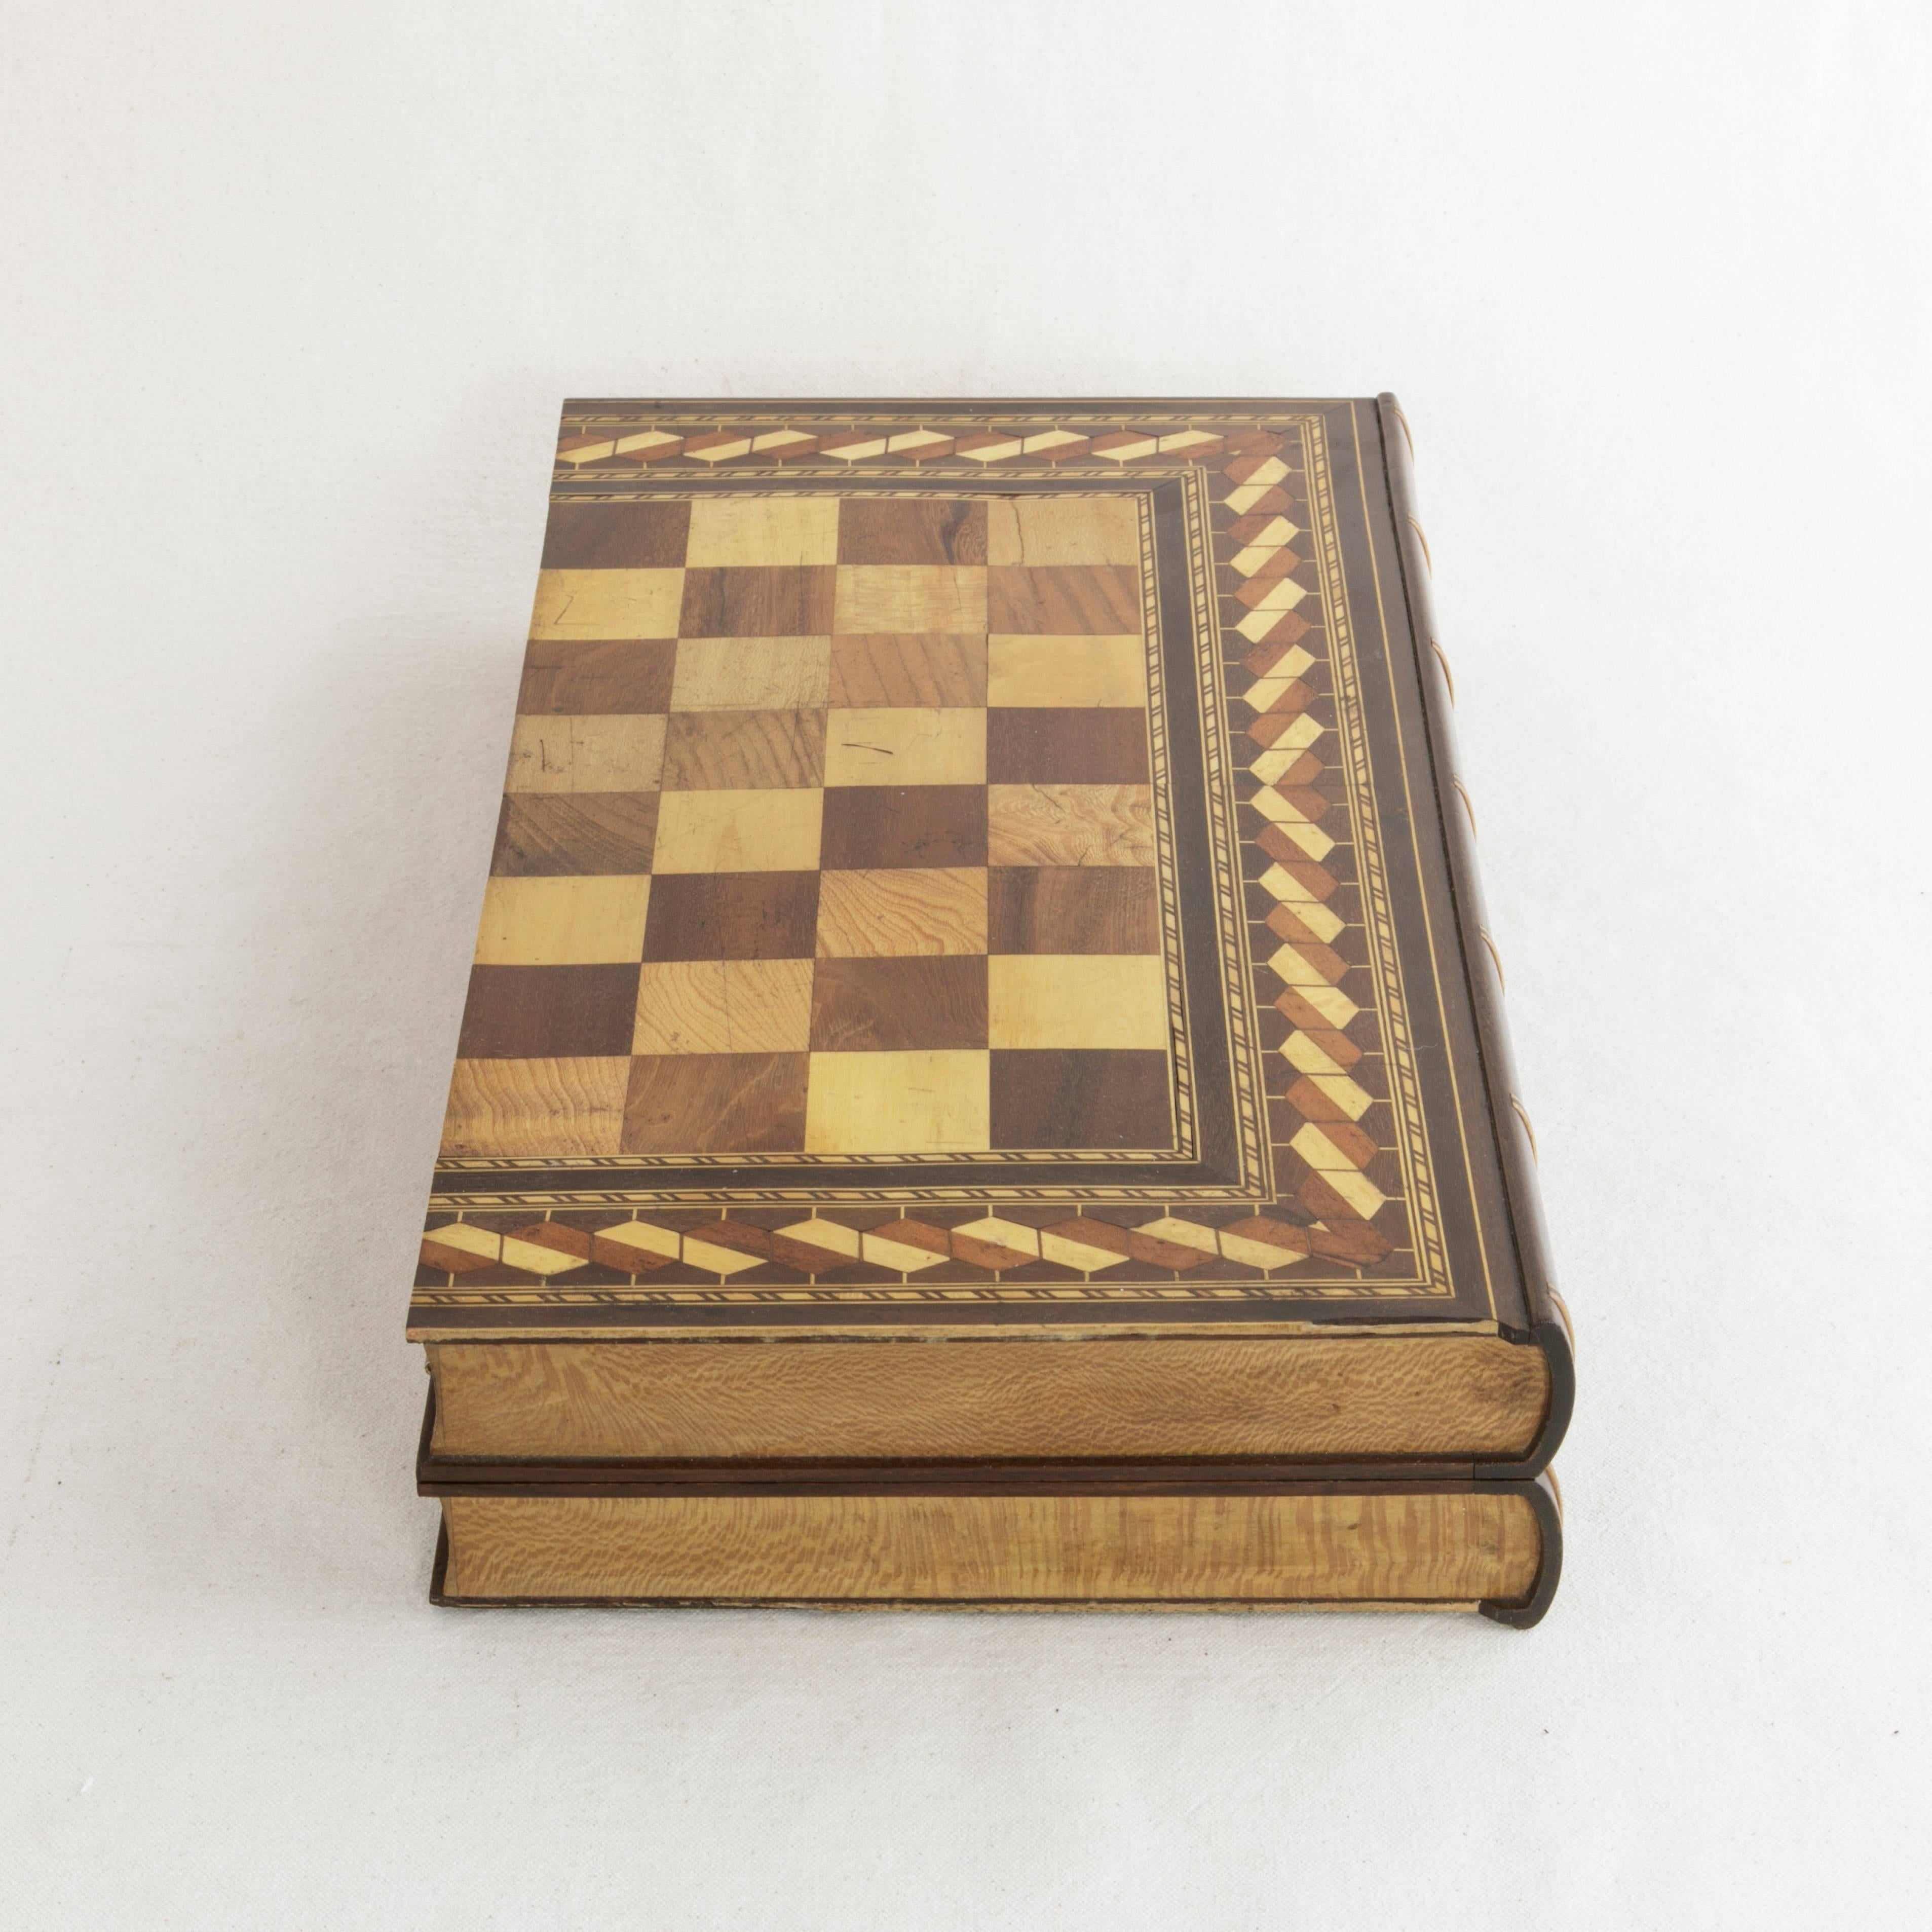 20th Century Hinged Marquetry Game Box for Chess, Checkers, Backgammon, Stacked Books Form